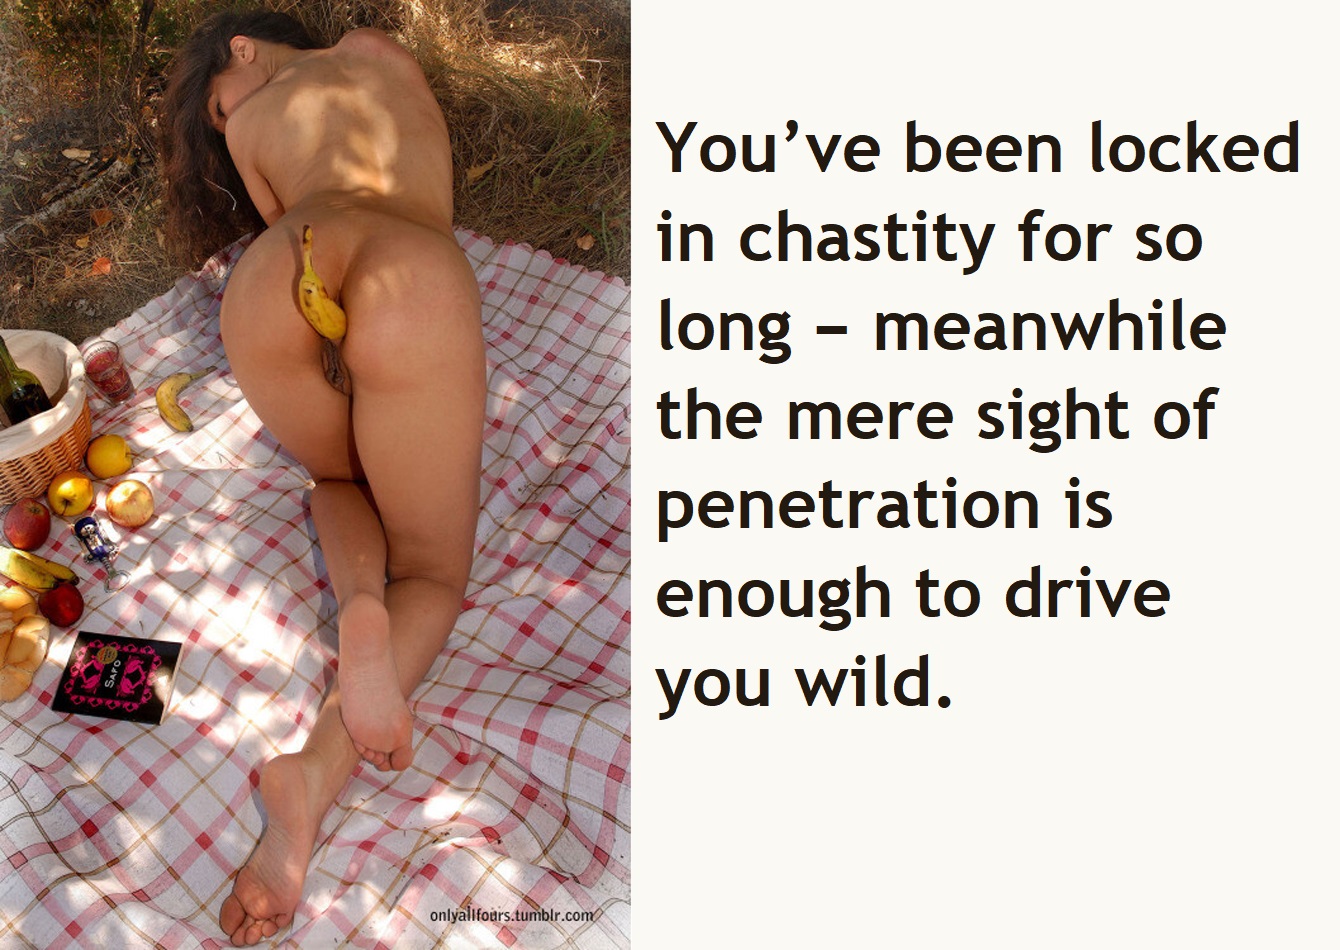 It drives you wild, and it would even without the enforced chastity